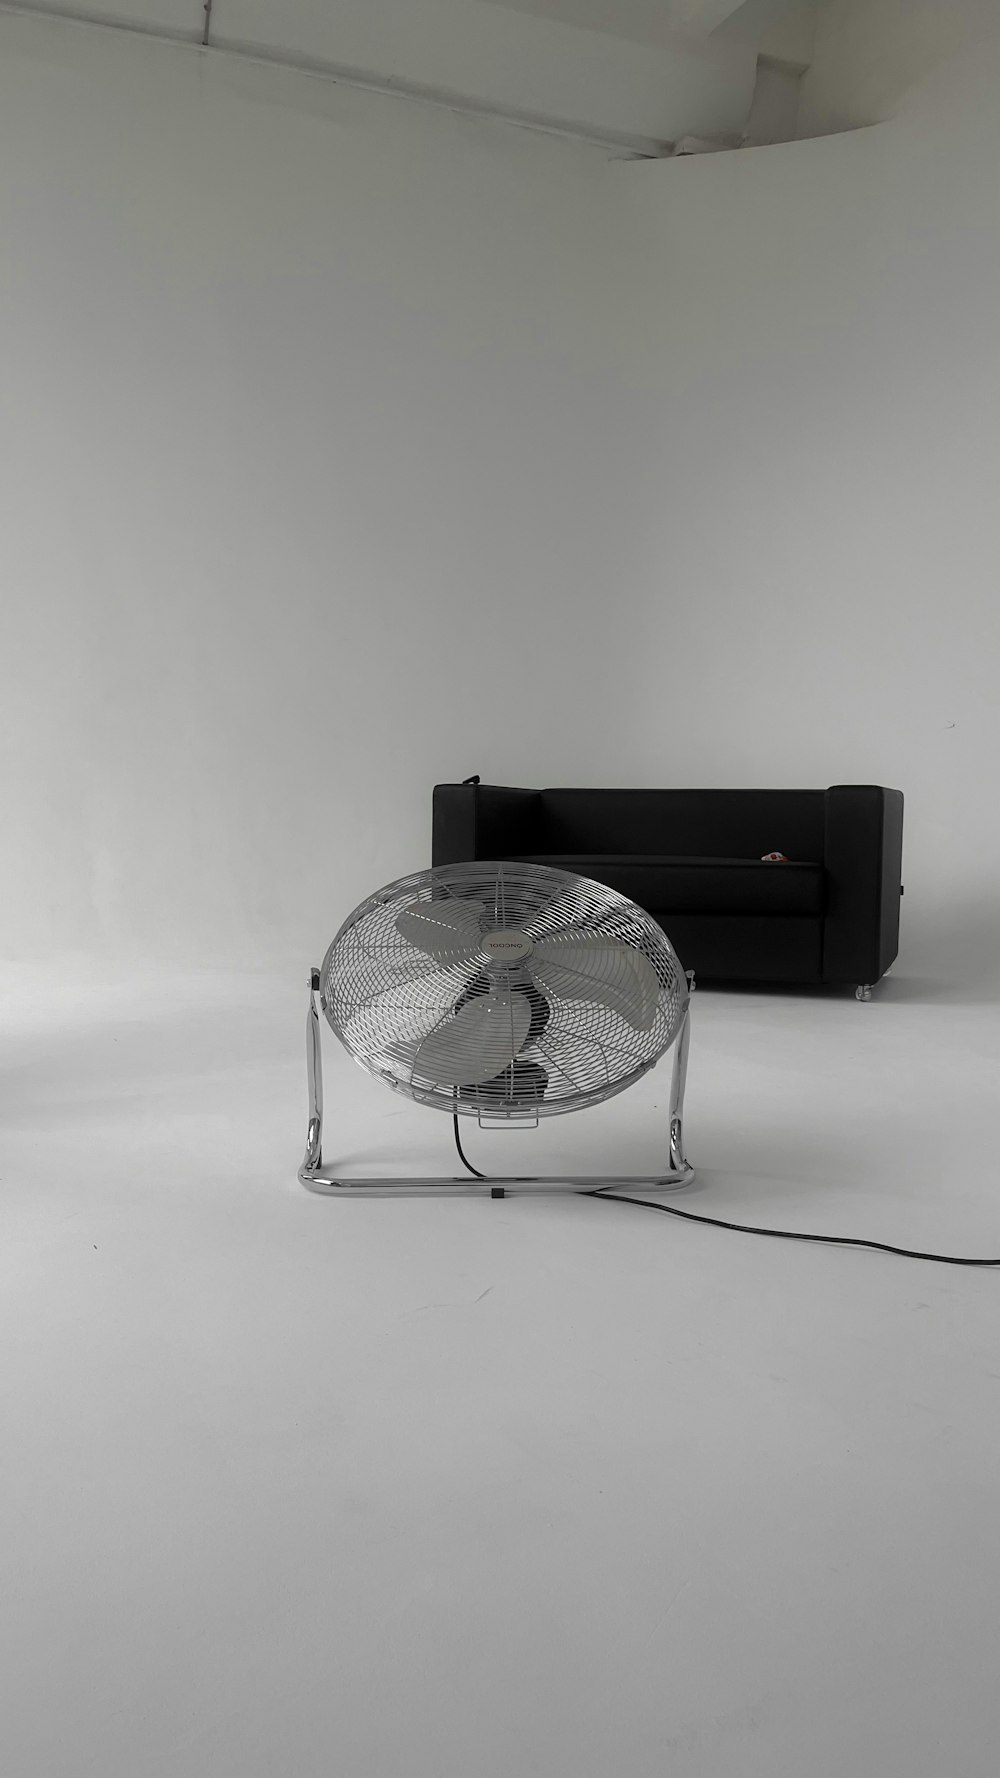 a black couch and a fan in a room